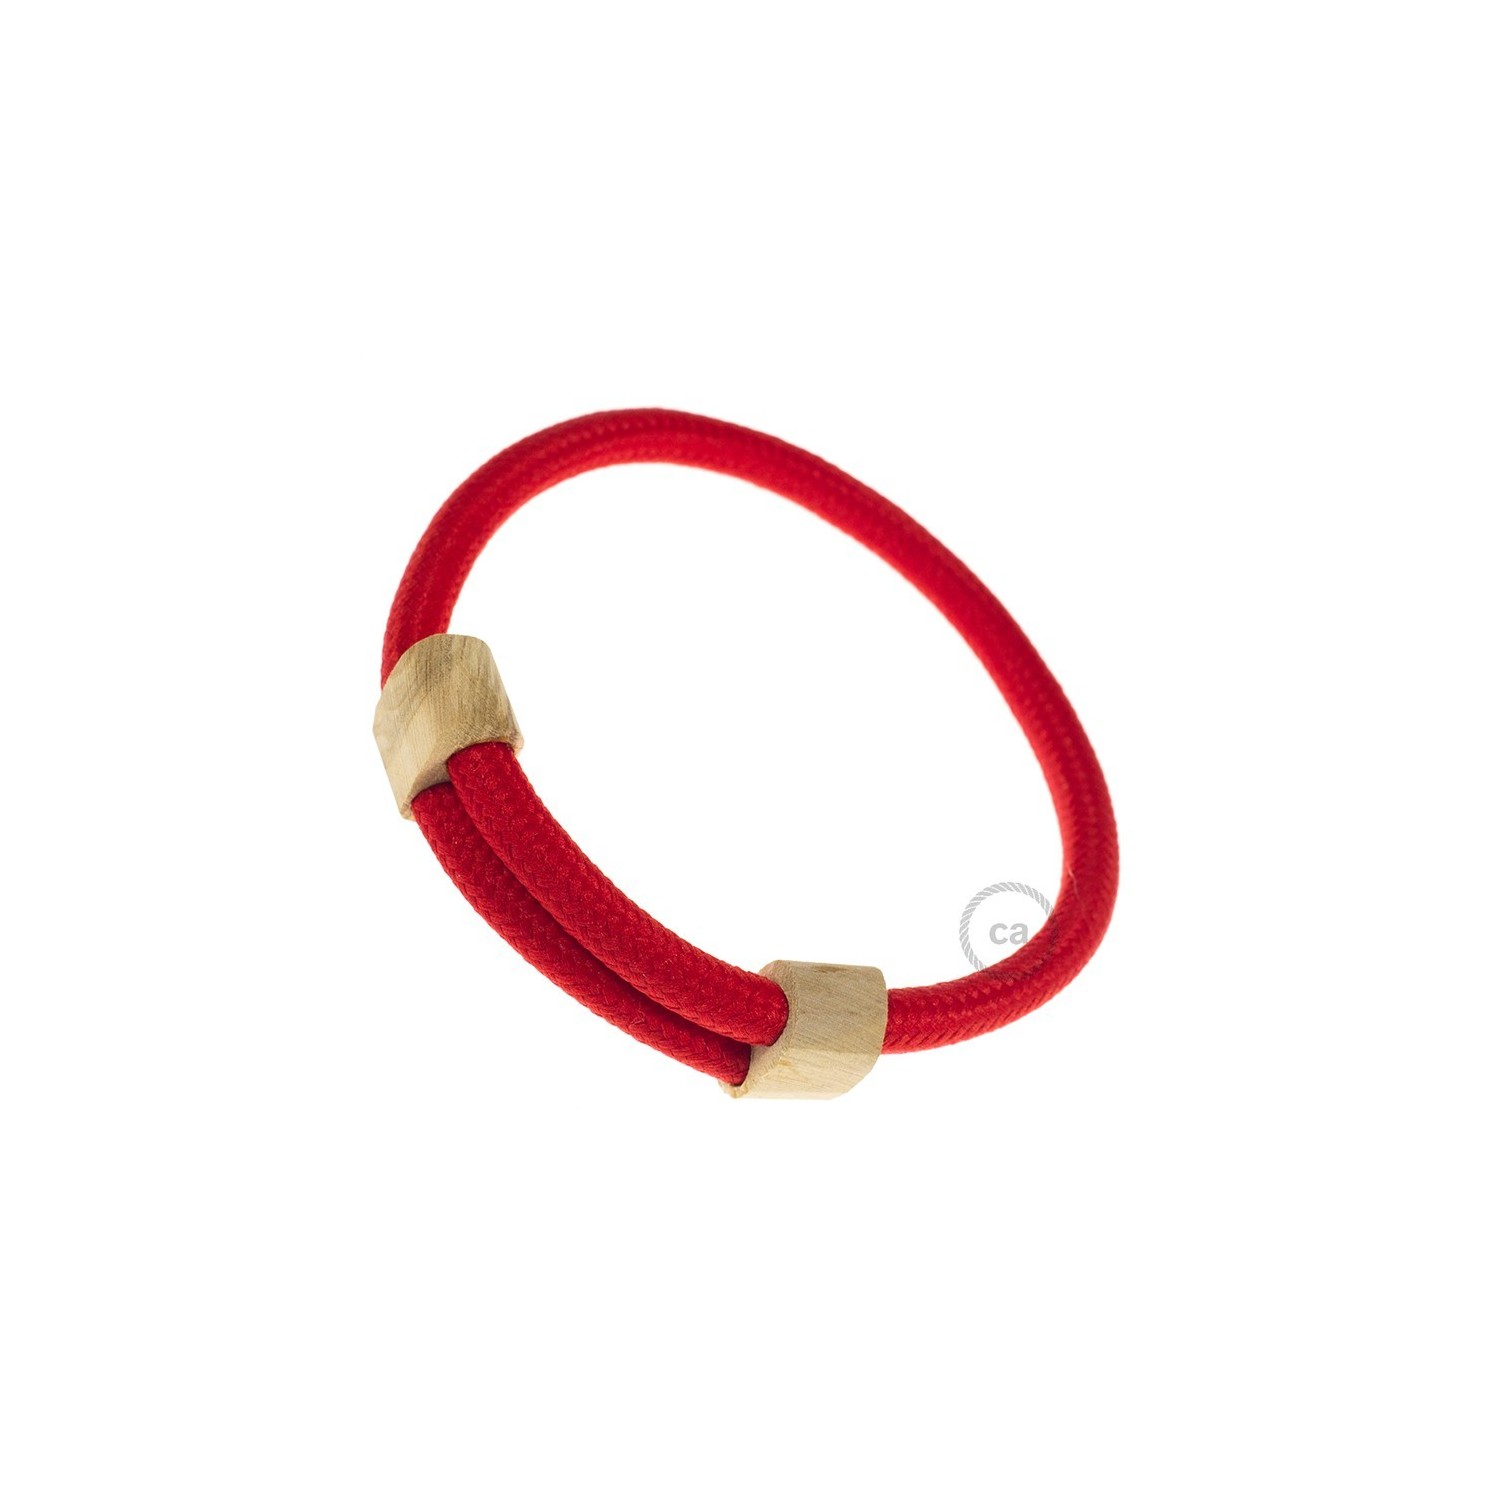 Creative-Bracelet in Rayon solid color red fabric RM09. Wood sliding fastening. Made in Italy.